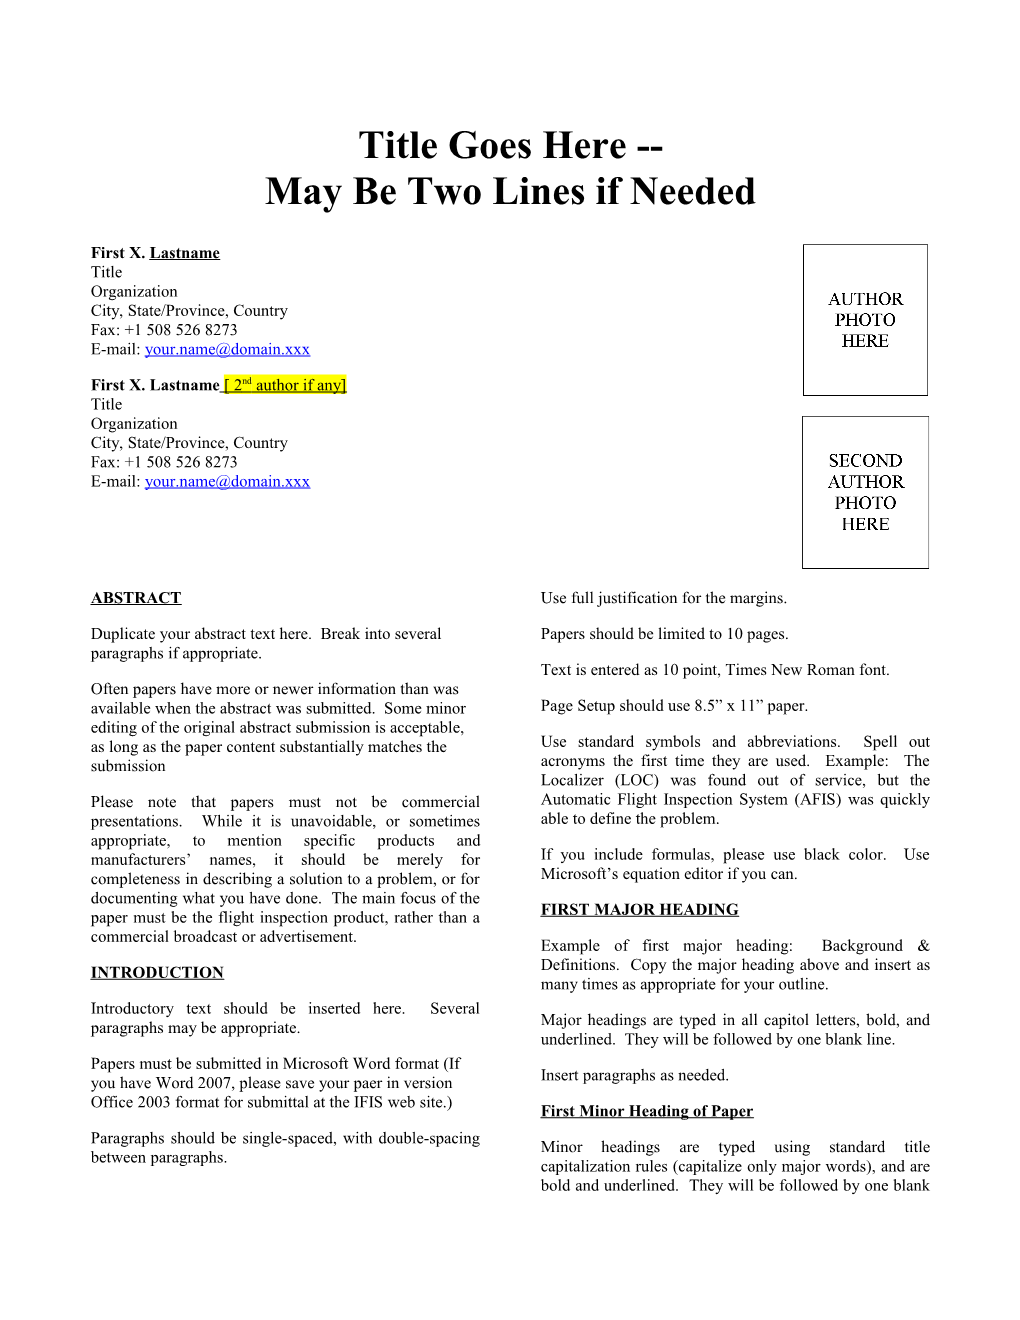 IFIS 2008 Paper Template